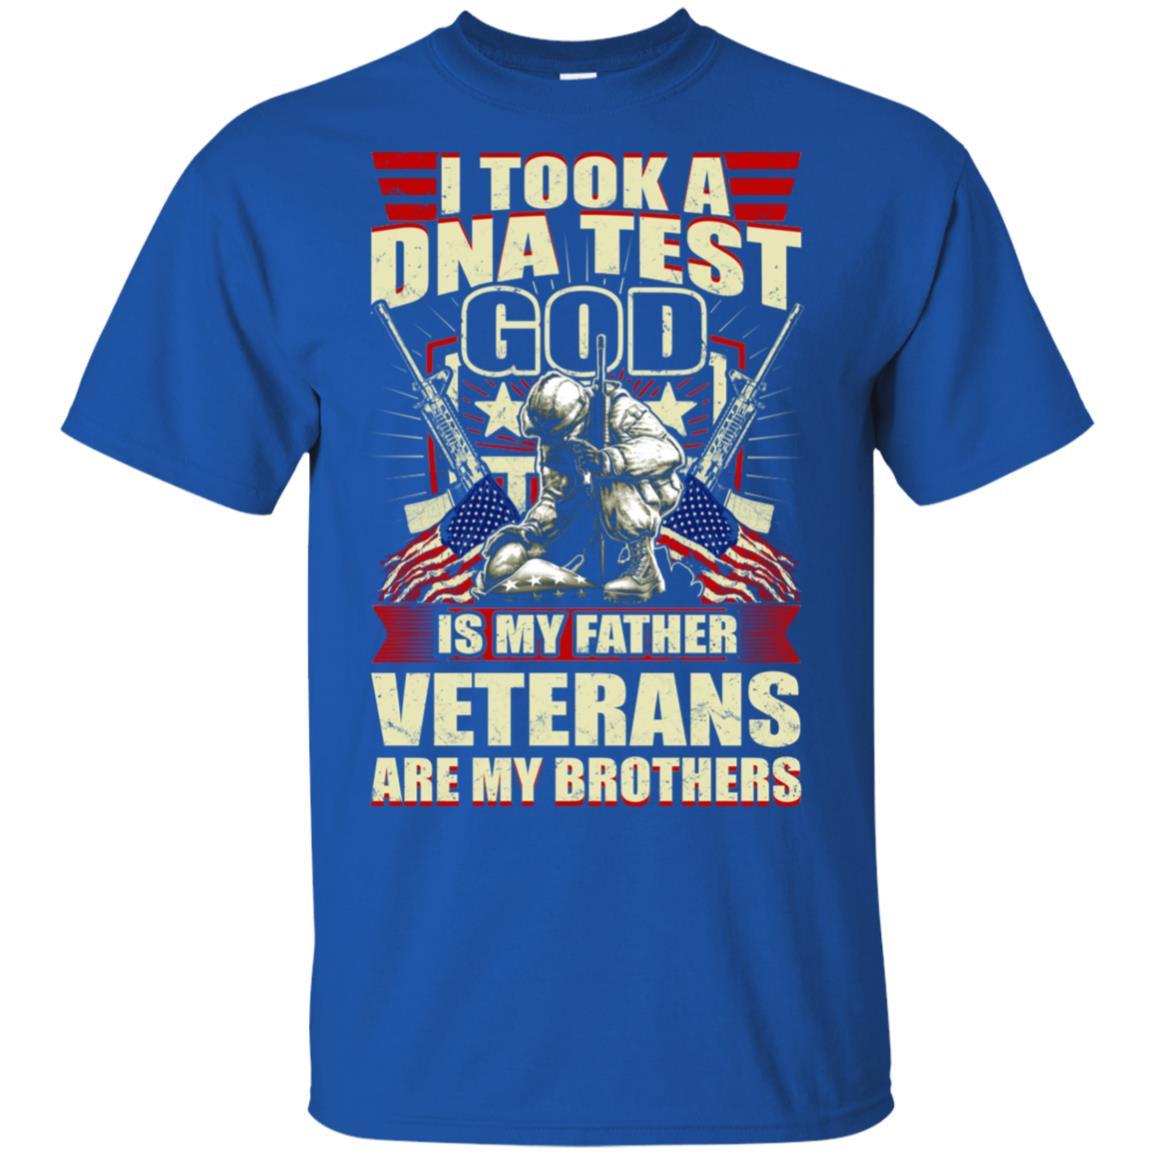 Military T-Shirt "I Took A Dna Test God Is My Father Veterans Are My Brothers On" Front-TShirt-General-Veterans Nation